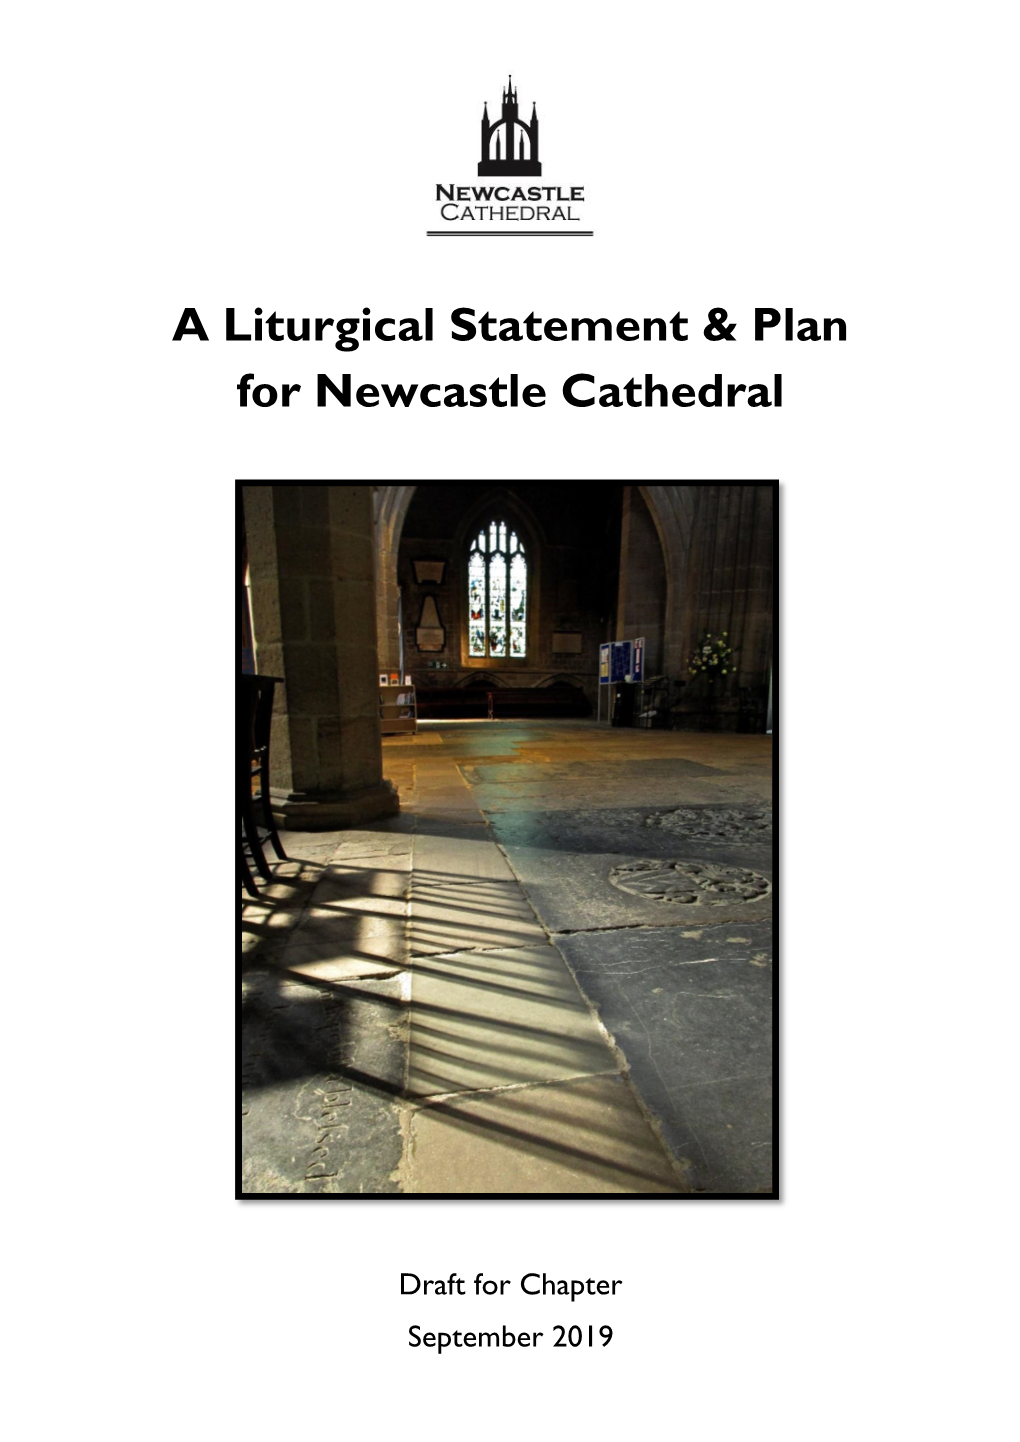 A Liturgical Statement & Plan for Newcastle Cathedral